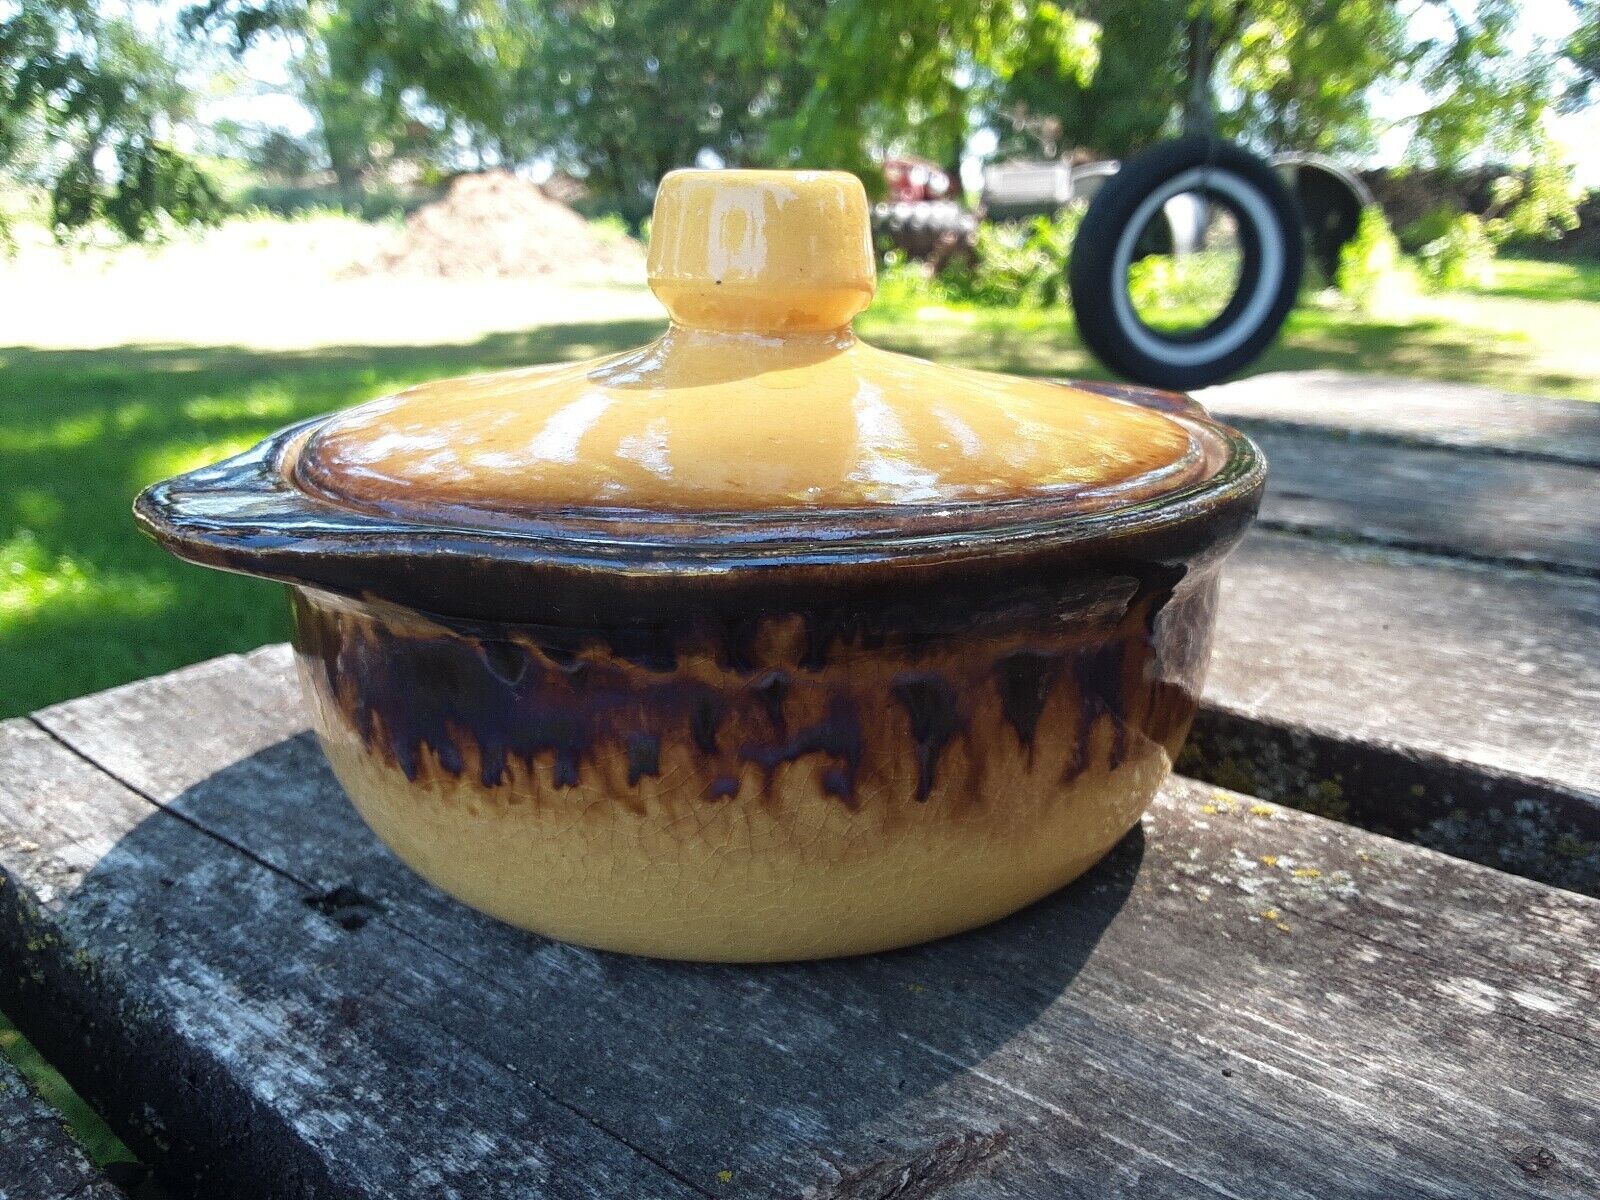  Medalta Pottery Canada Stoneware RedCliff ALTA Casserole Dish with Lid Yellow 